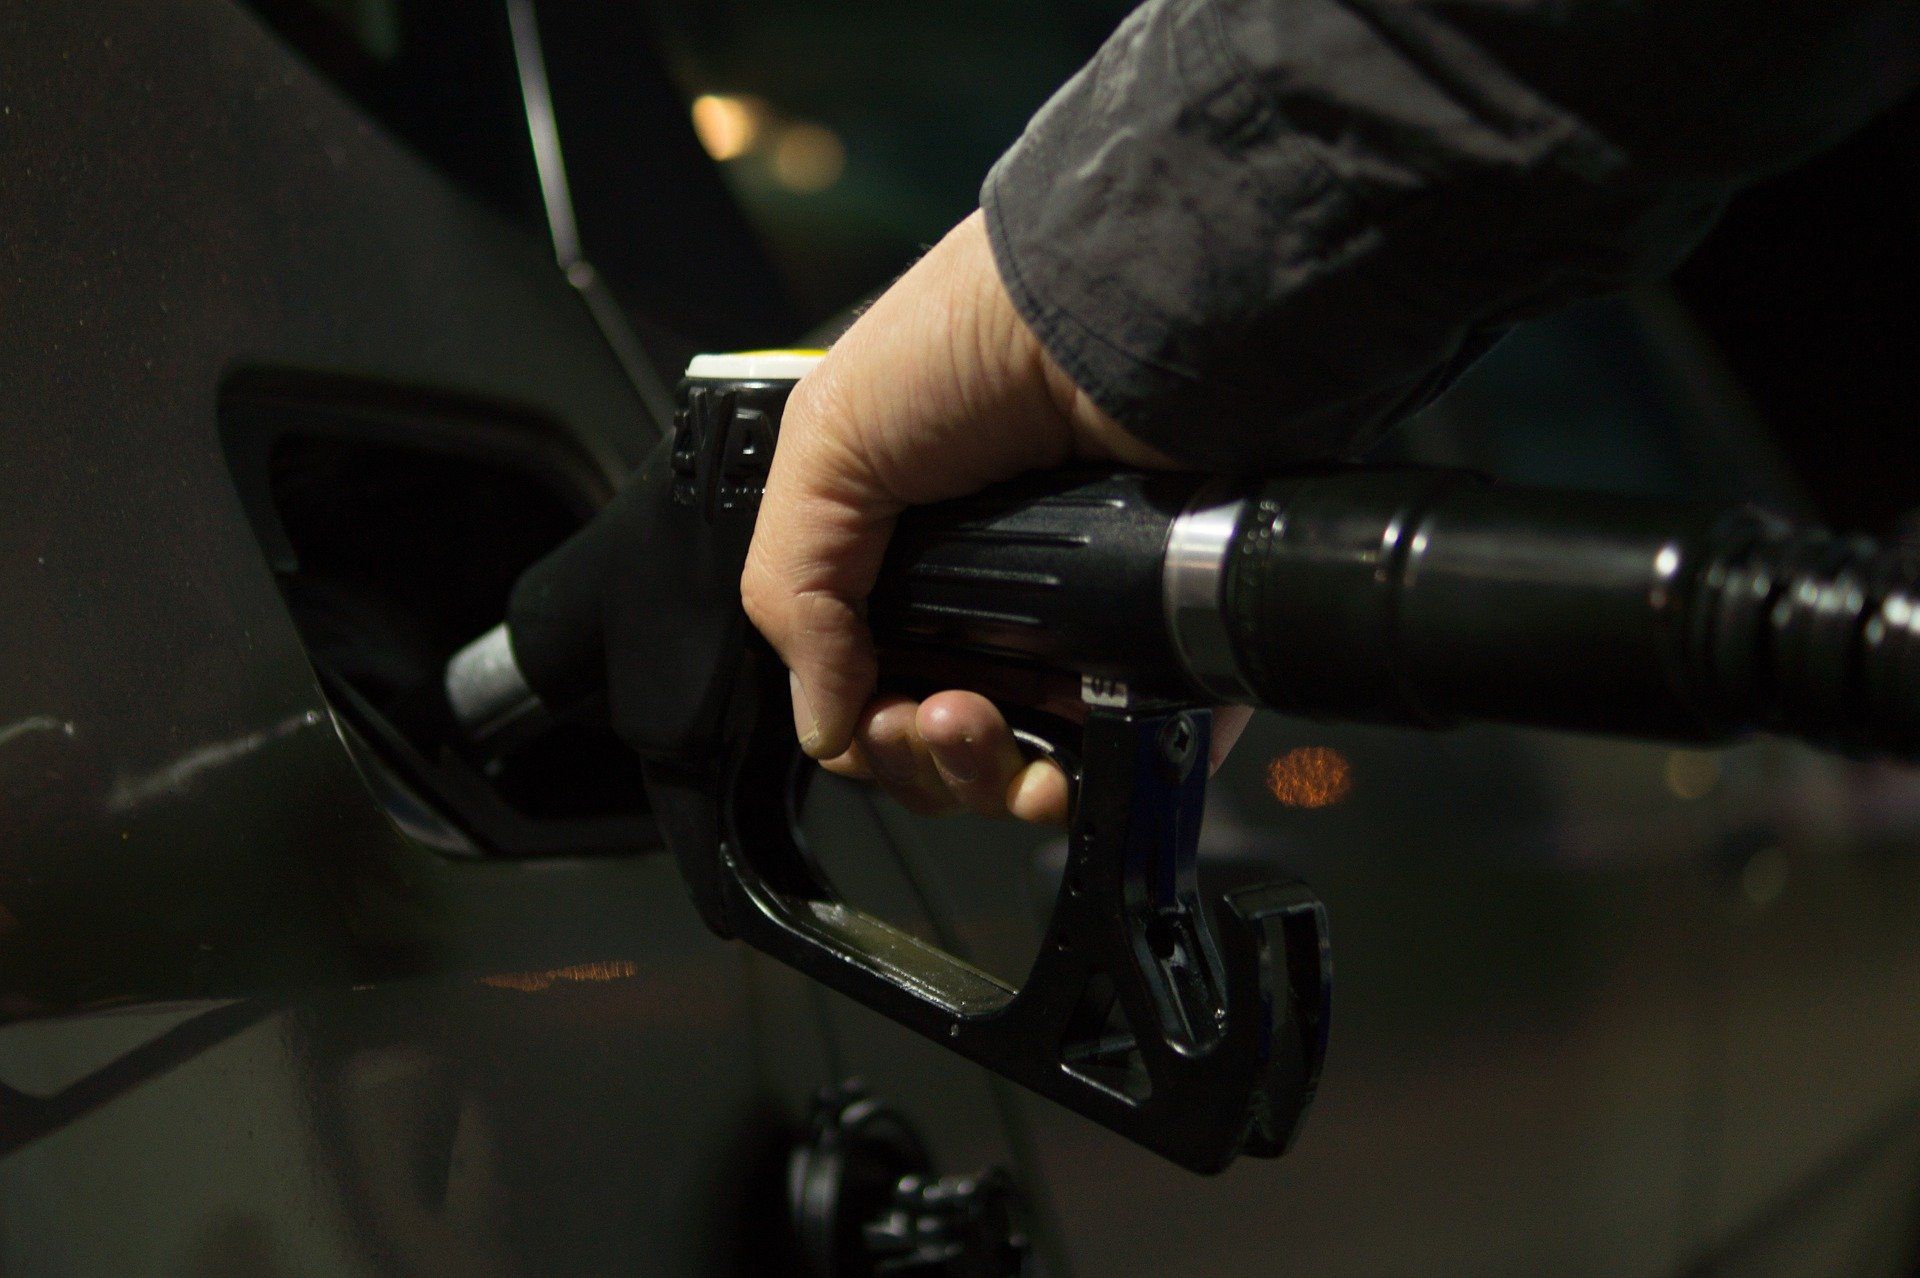 Fuel prices today: Petrol priced at Rs 95.41, diesel Rs 86.67 in Delhi on January 5, 2022